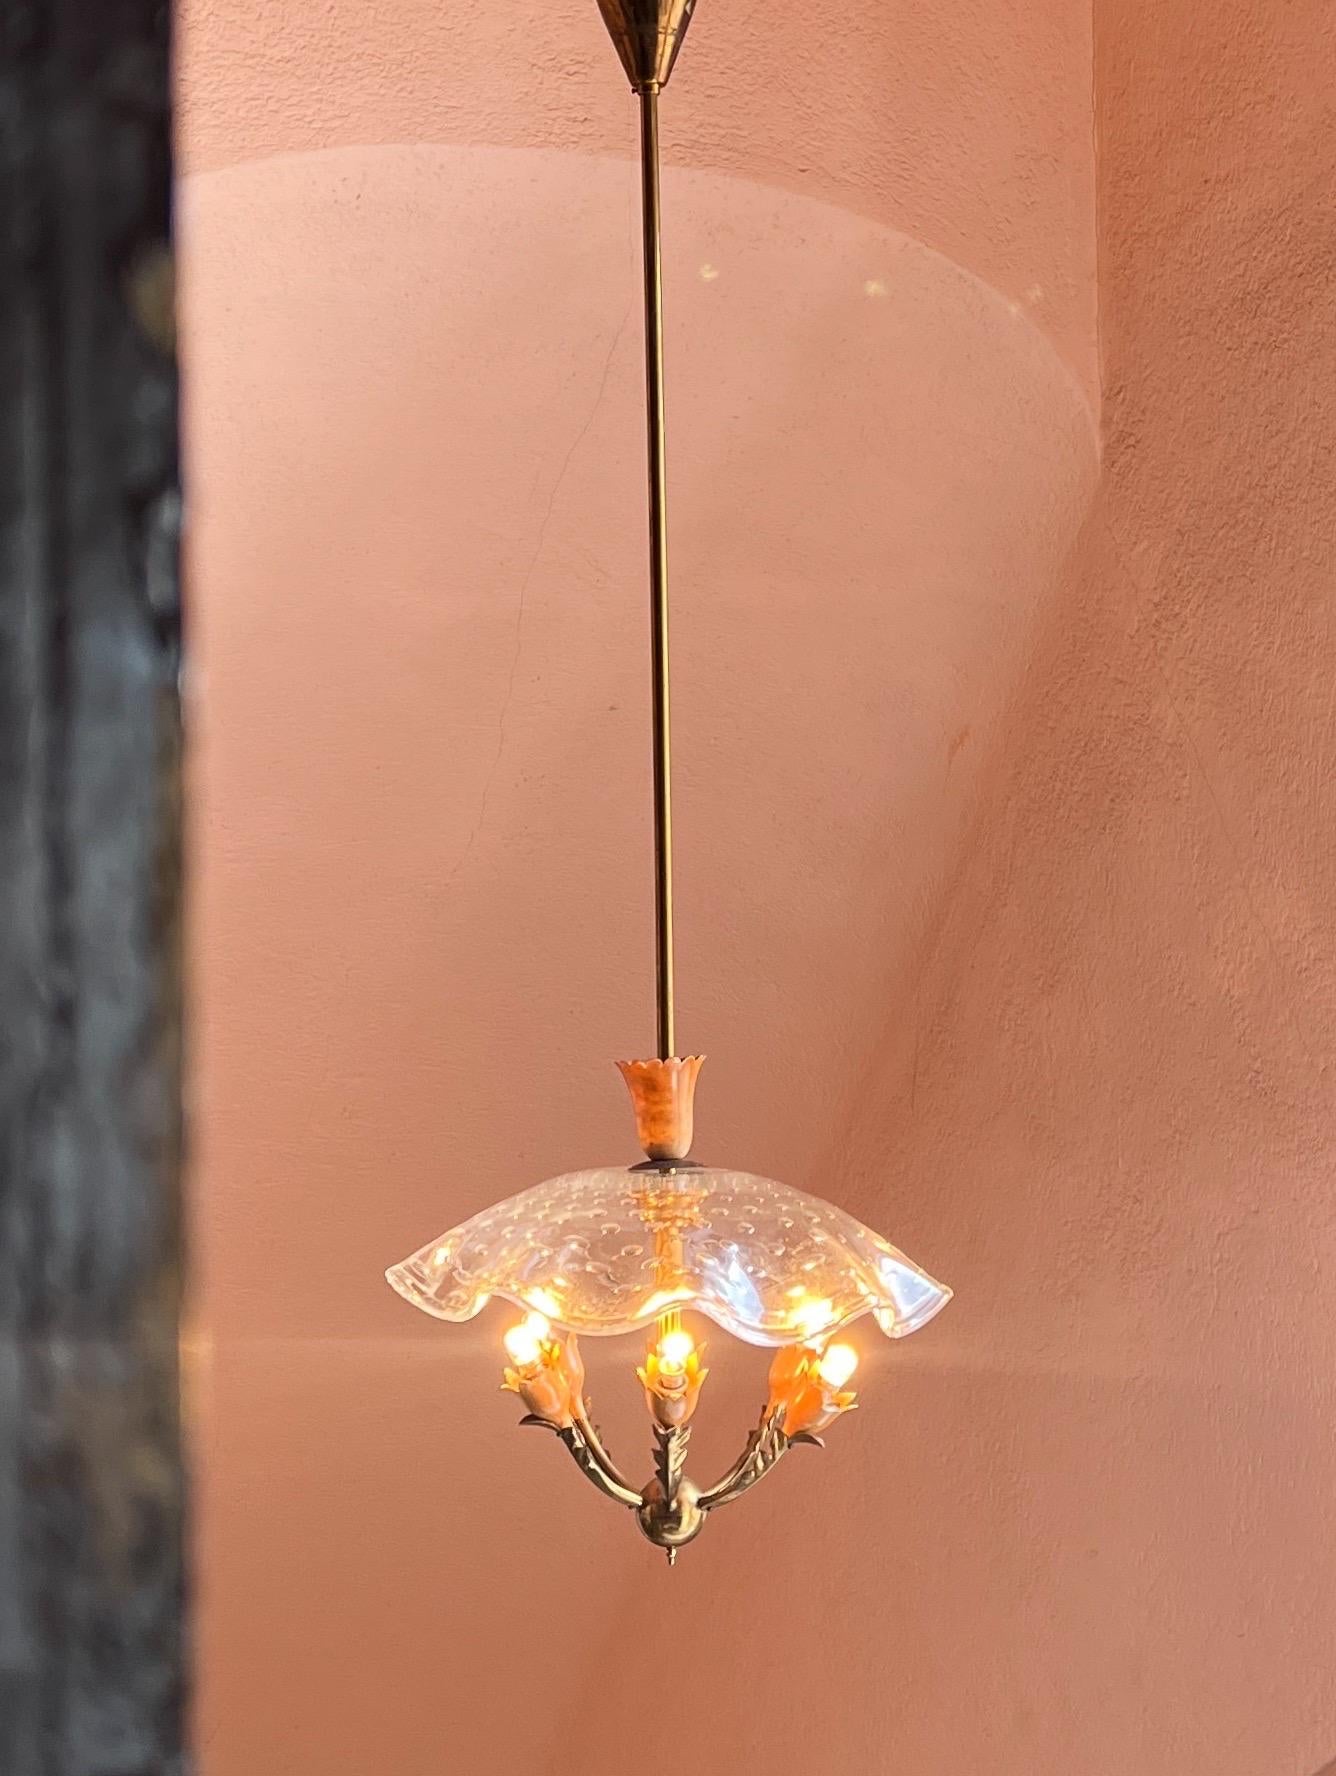 This stunning chandelier from the 1950s is said to be designed by none other than Gio Ponti himself. Picture this: a mesmerizing dotted Murano glass 